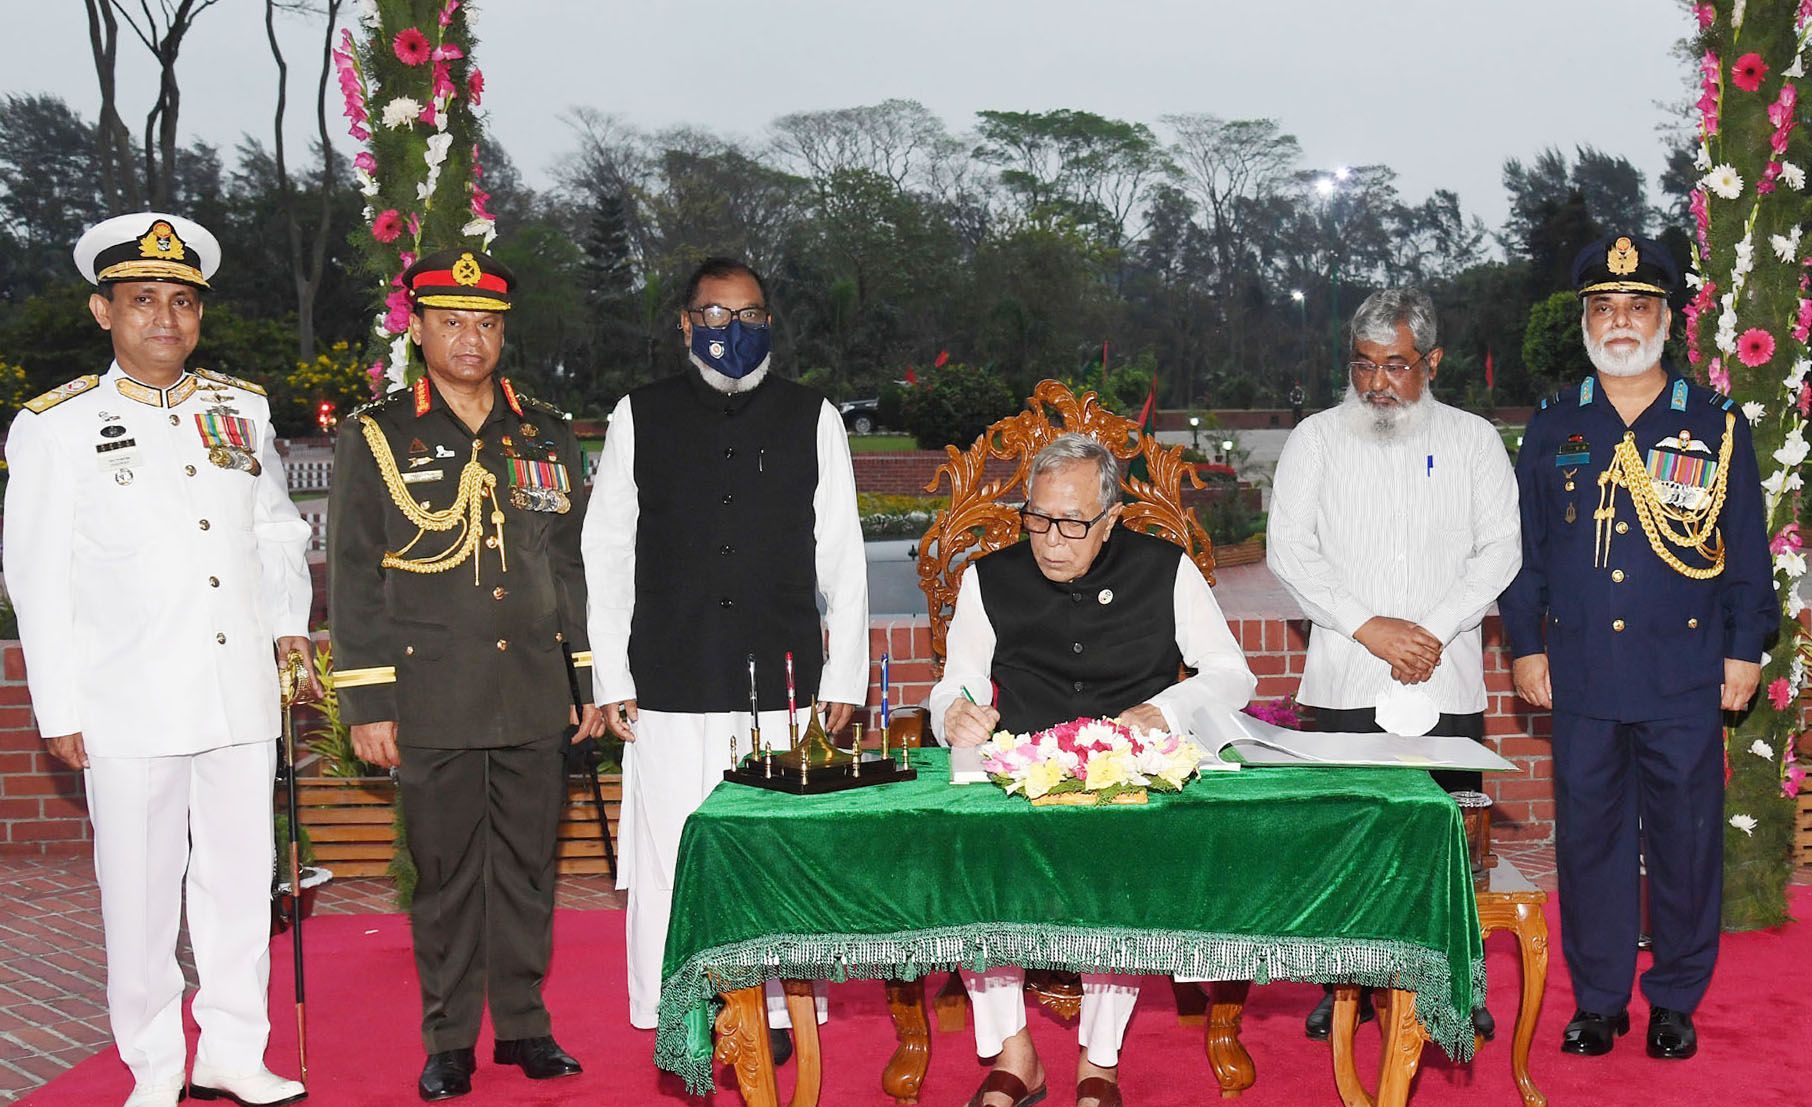 The head of the state also signed the visitors’ book kept on the memorial premises.